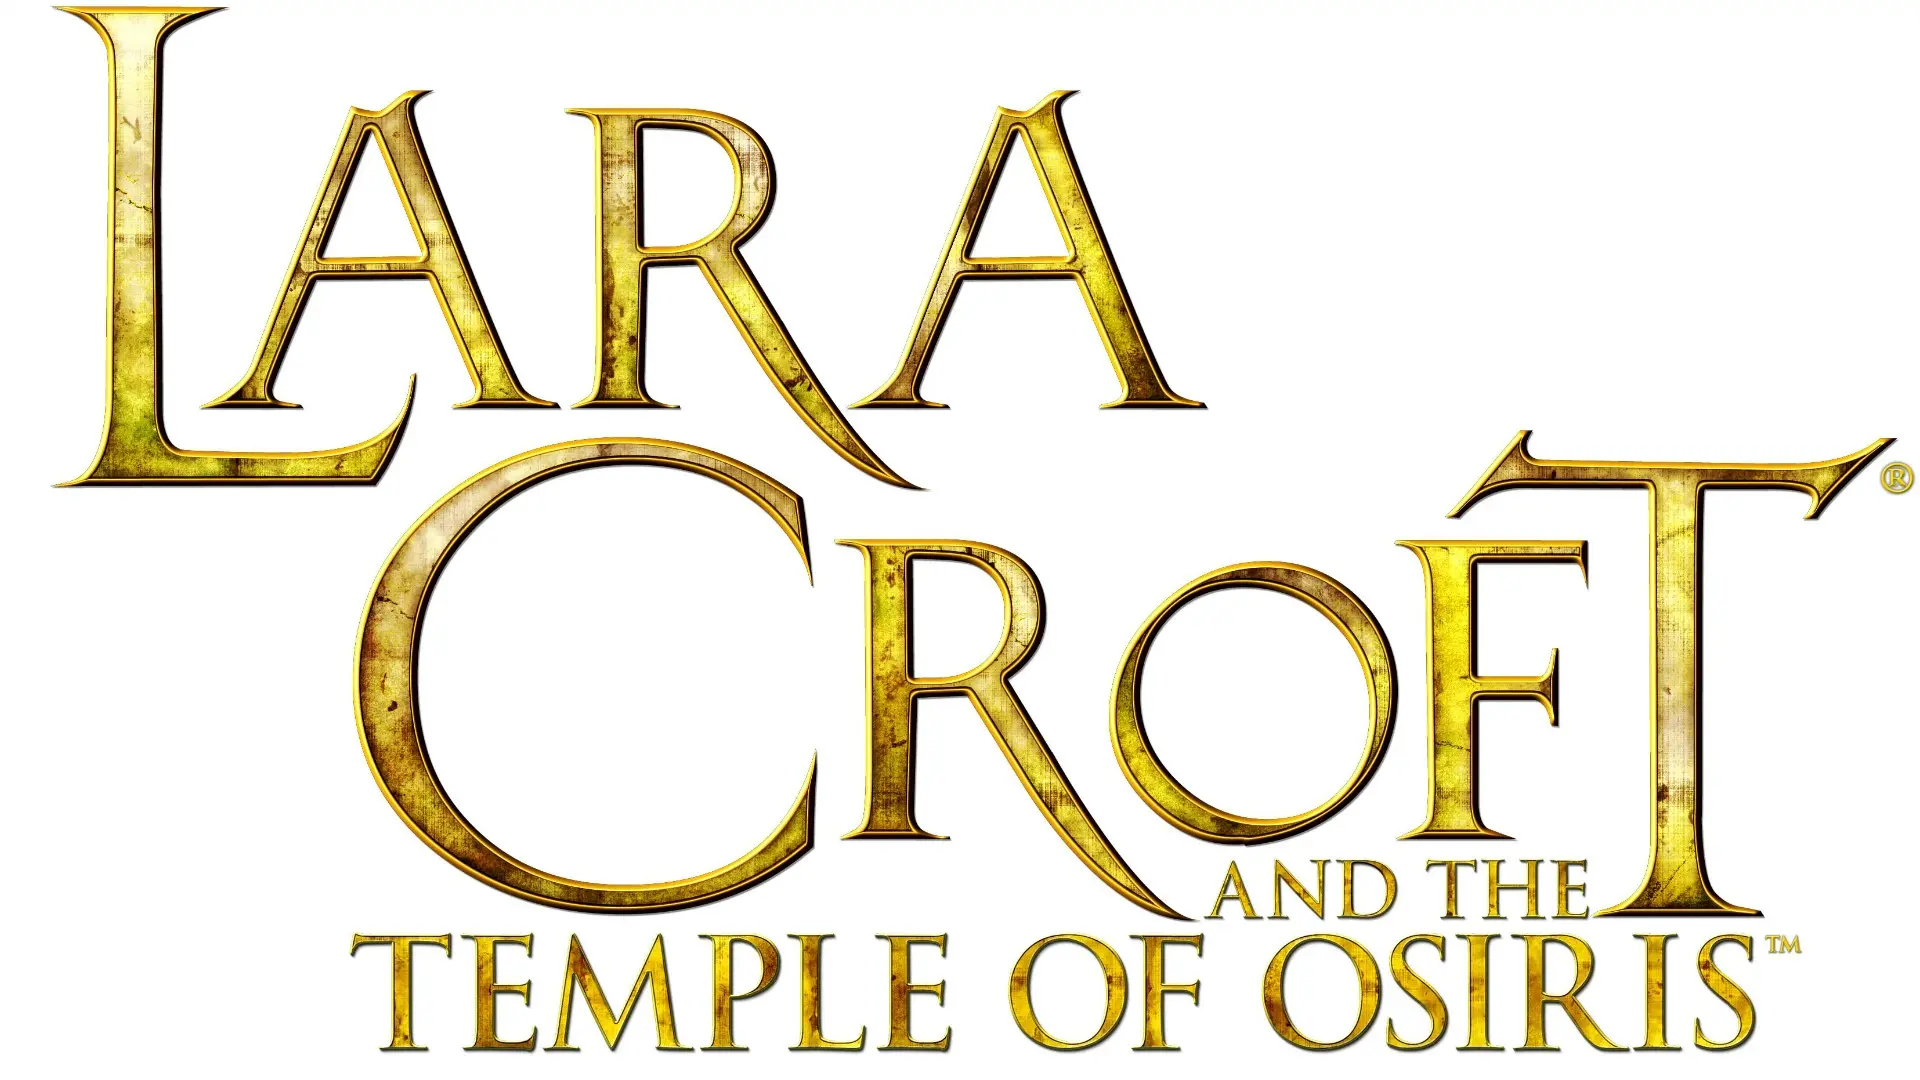 Game Lara Croft and The Temple of Osiris wallpaper 2 | Background Image